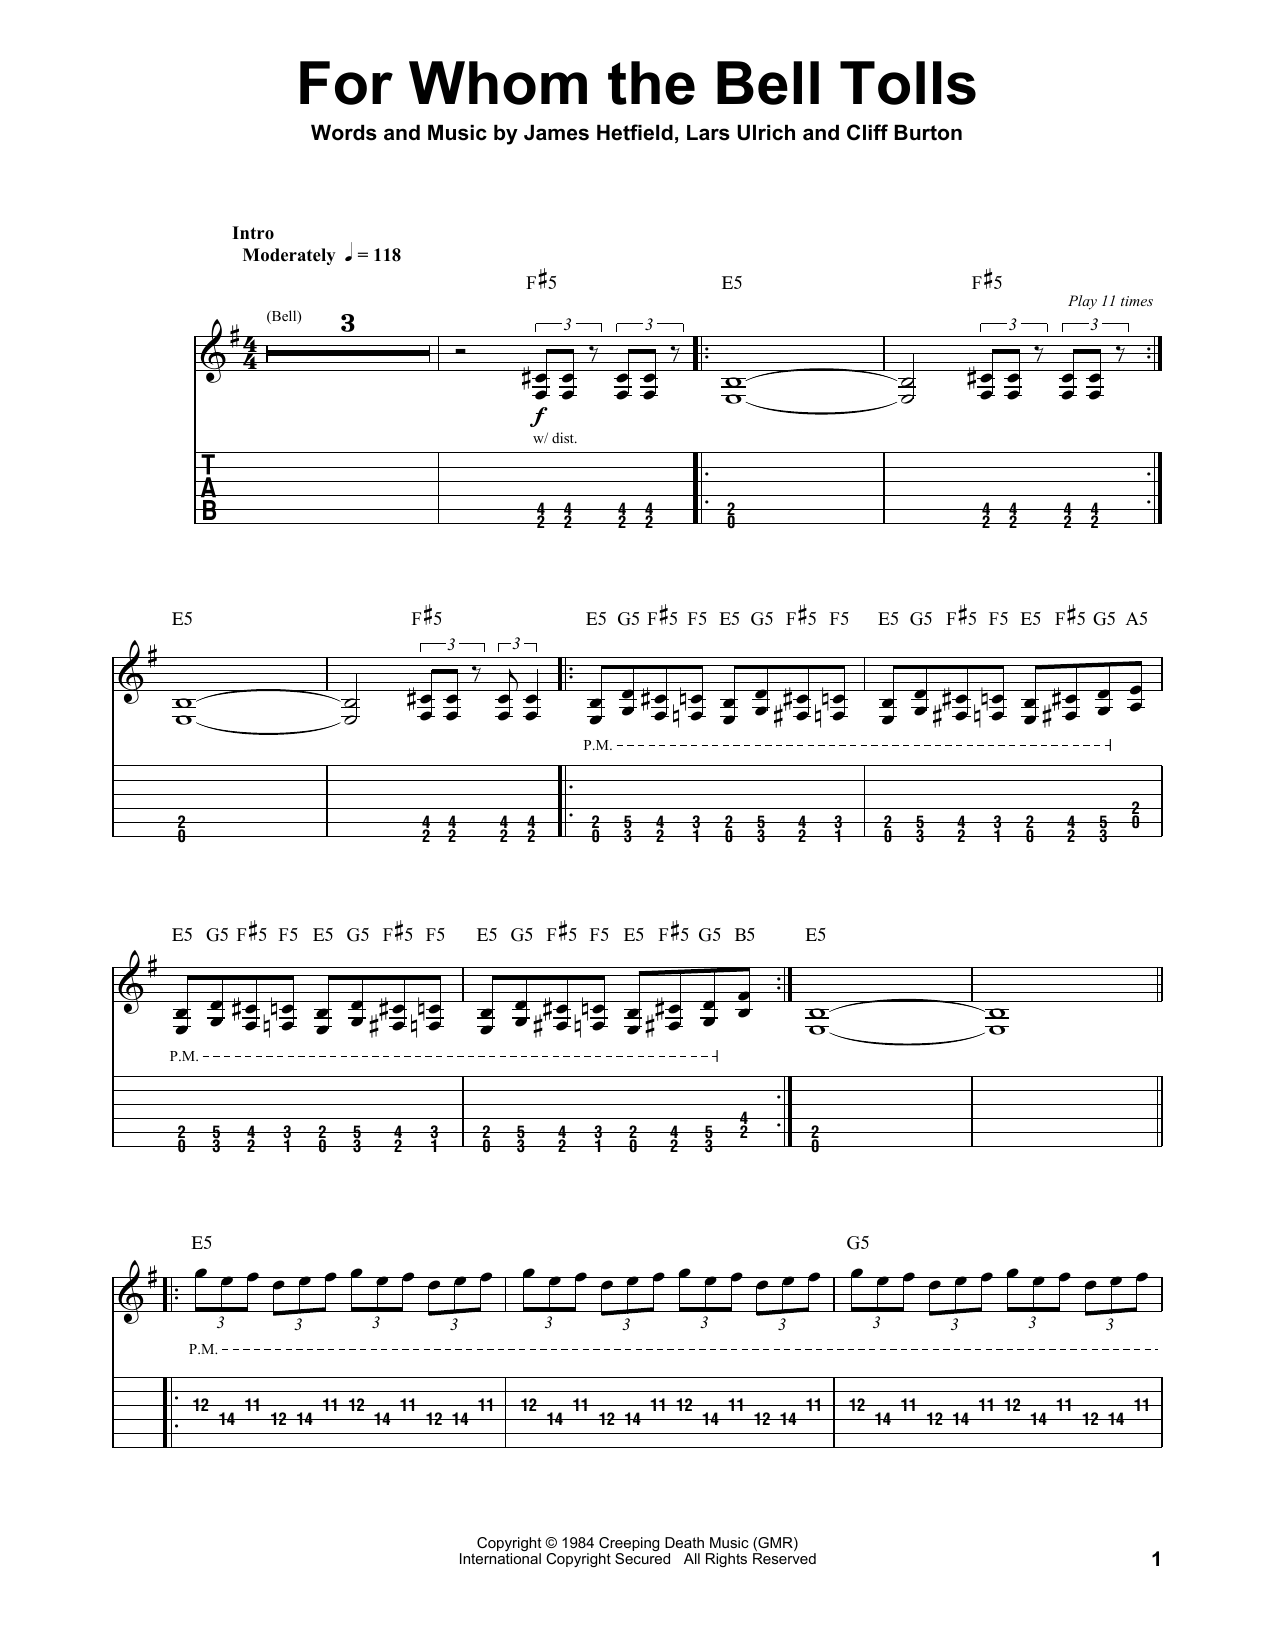 Download Metallica For Whom The Bell Tolls Sheet Music